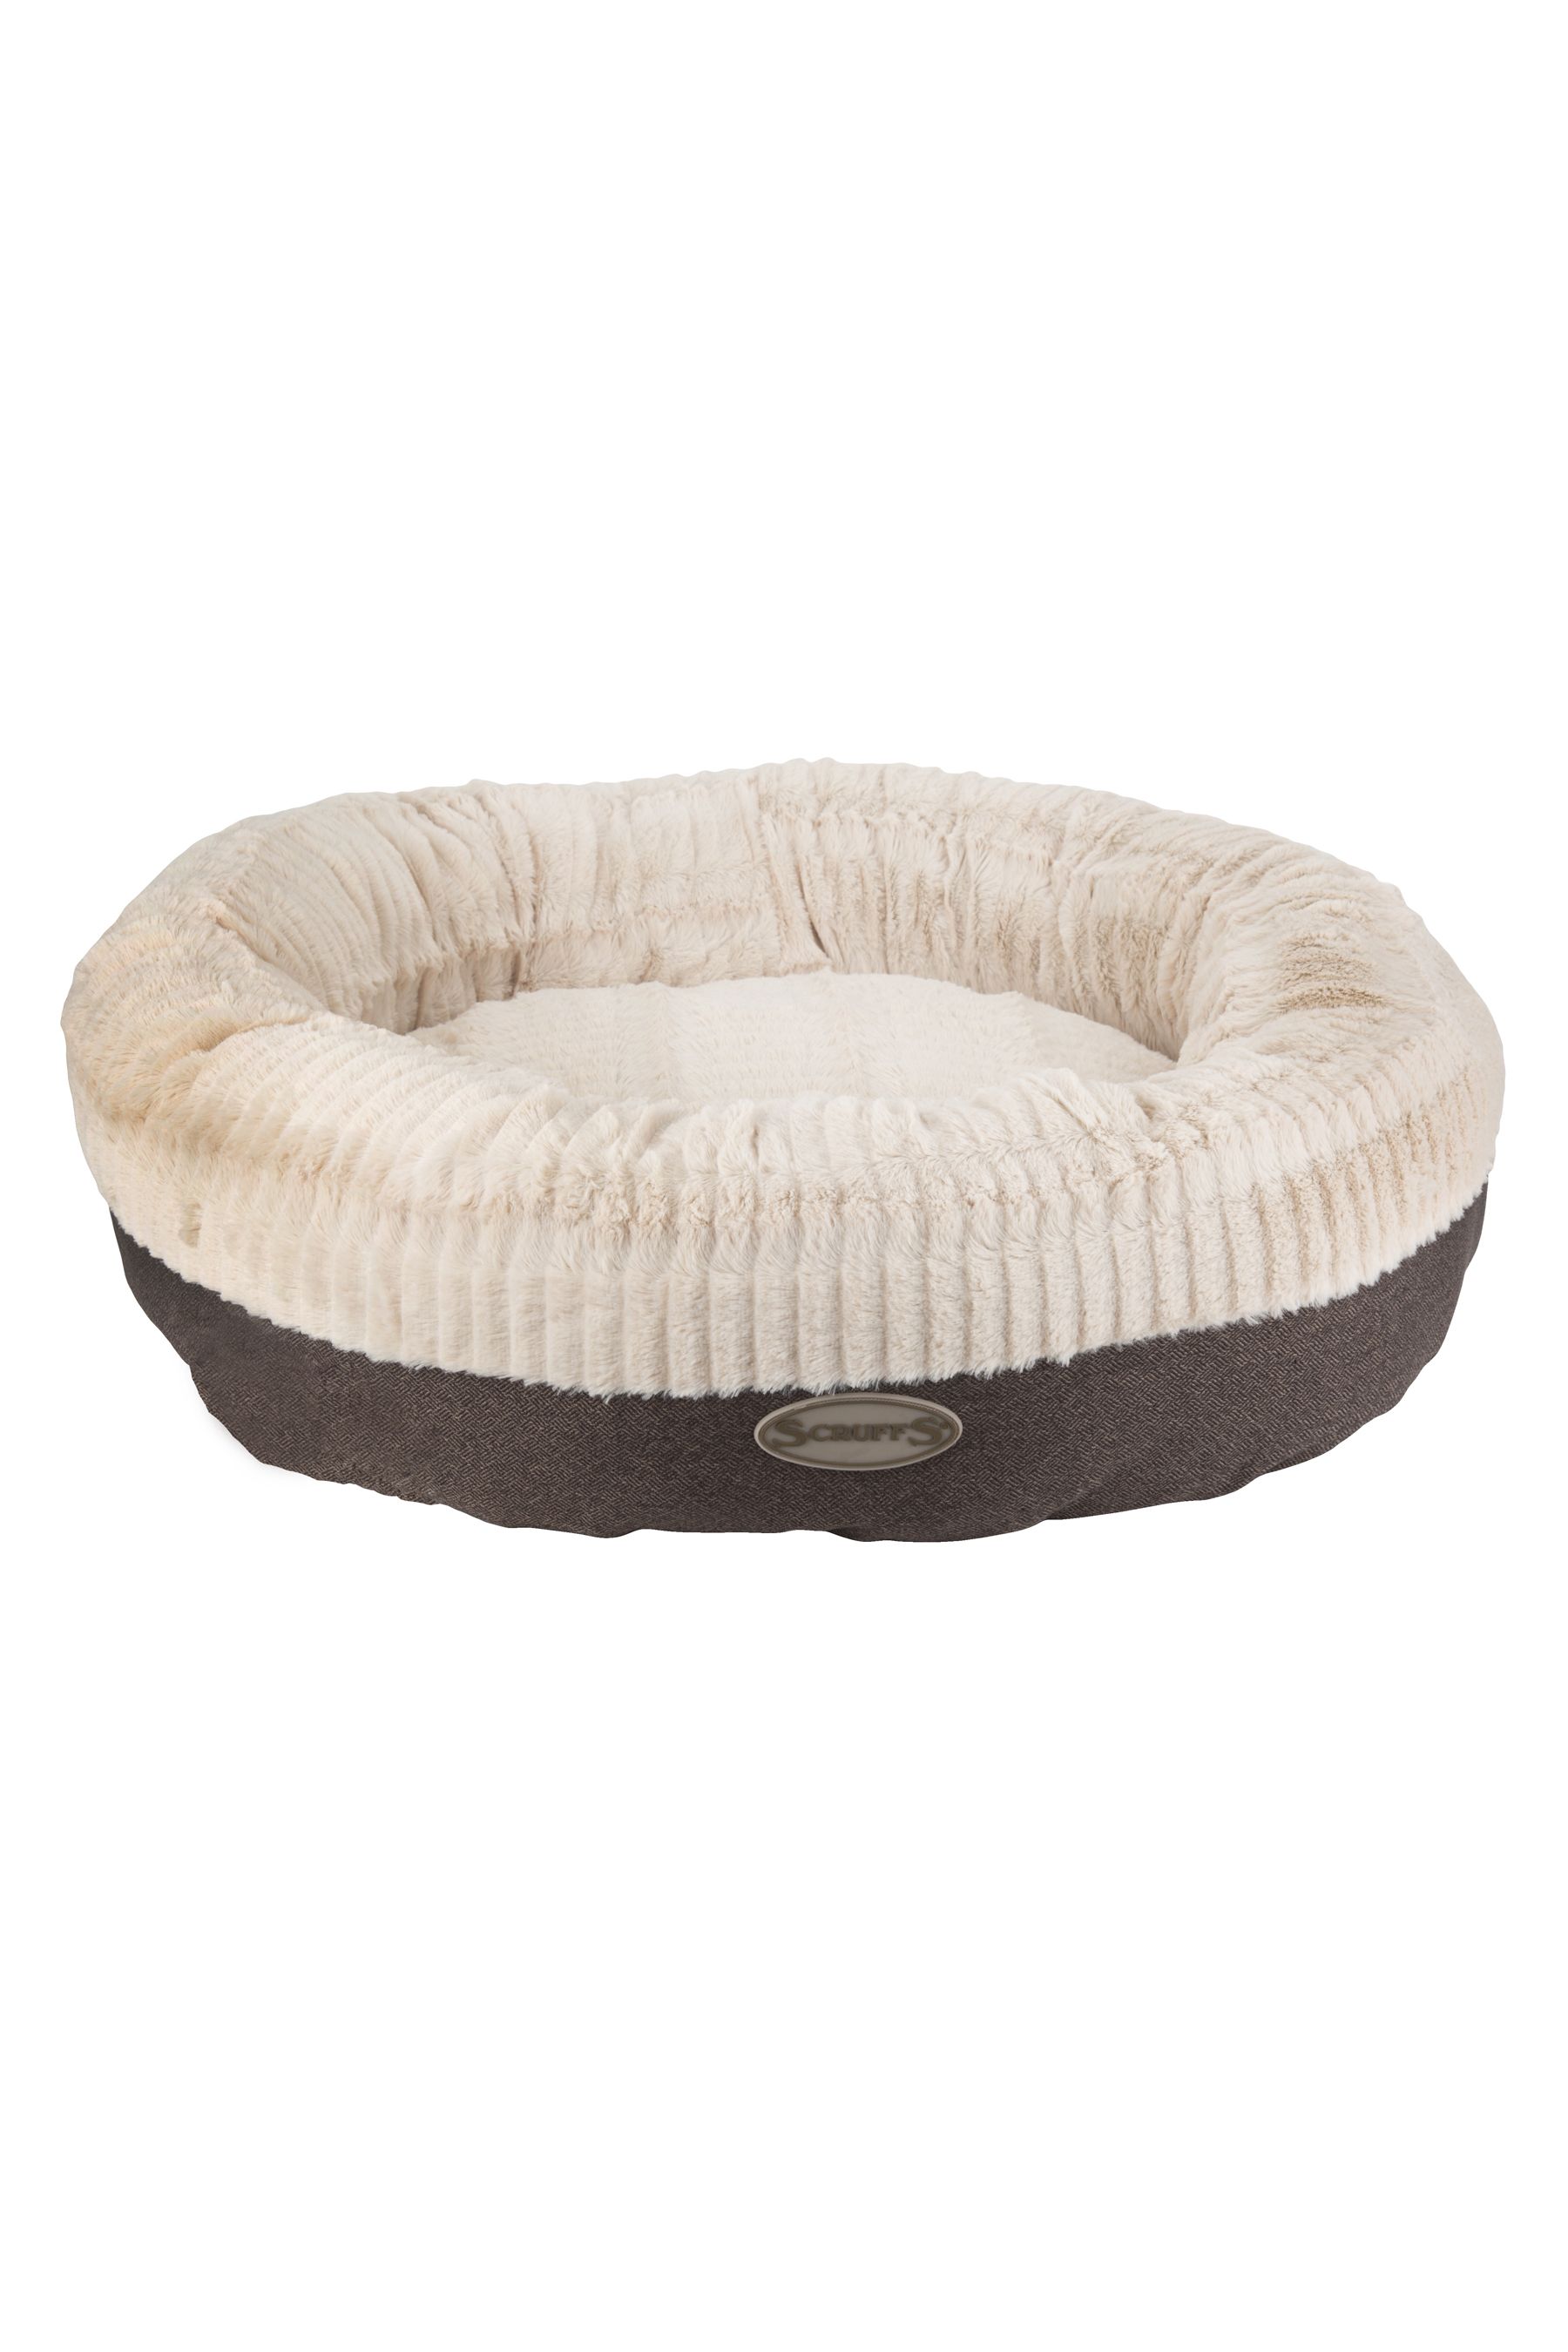 Buy Extra Large Breed Dog Ellen Bed by Scruffs® from the